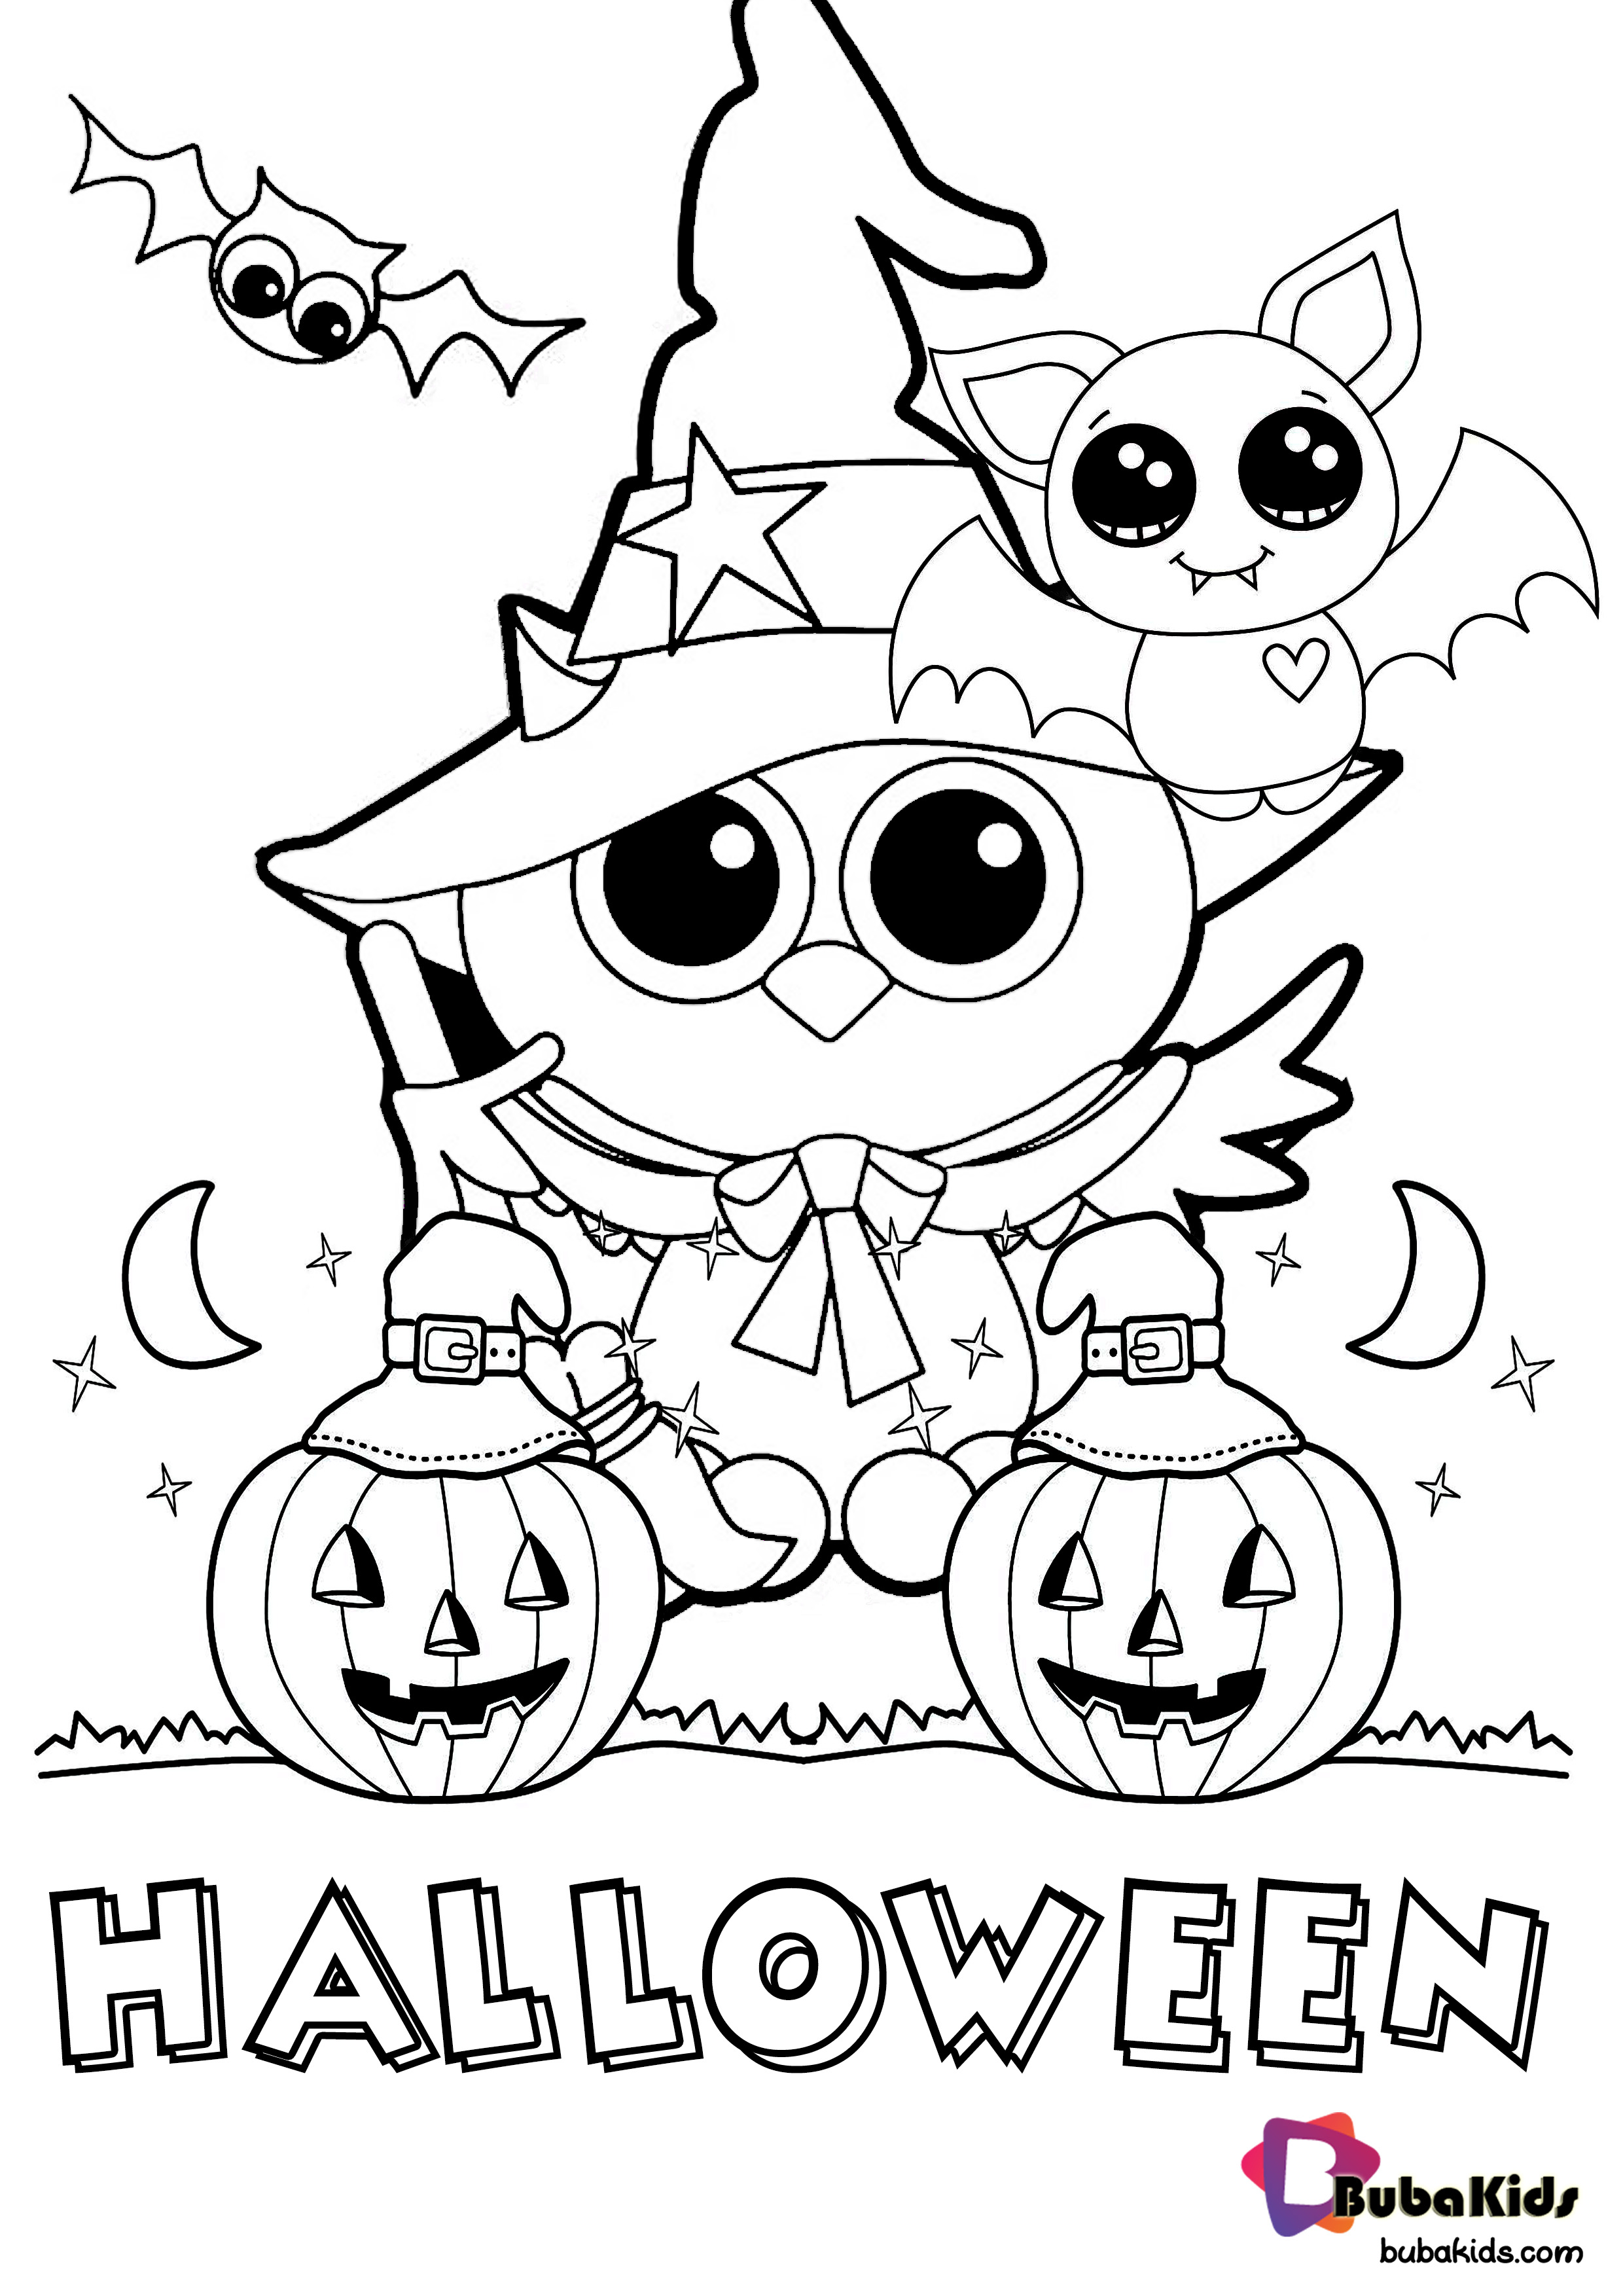 Halloween Colouring Sheets Free Printables : Halloween Coloring ...